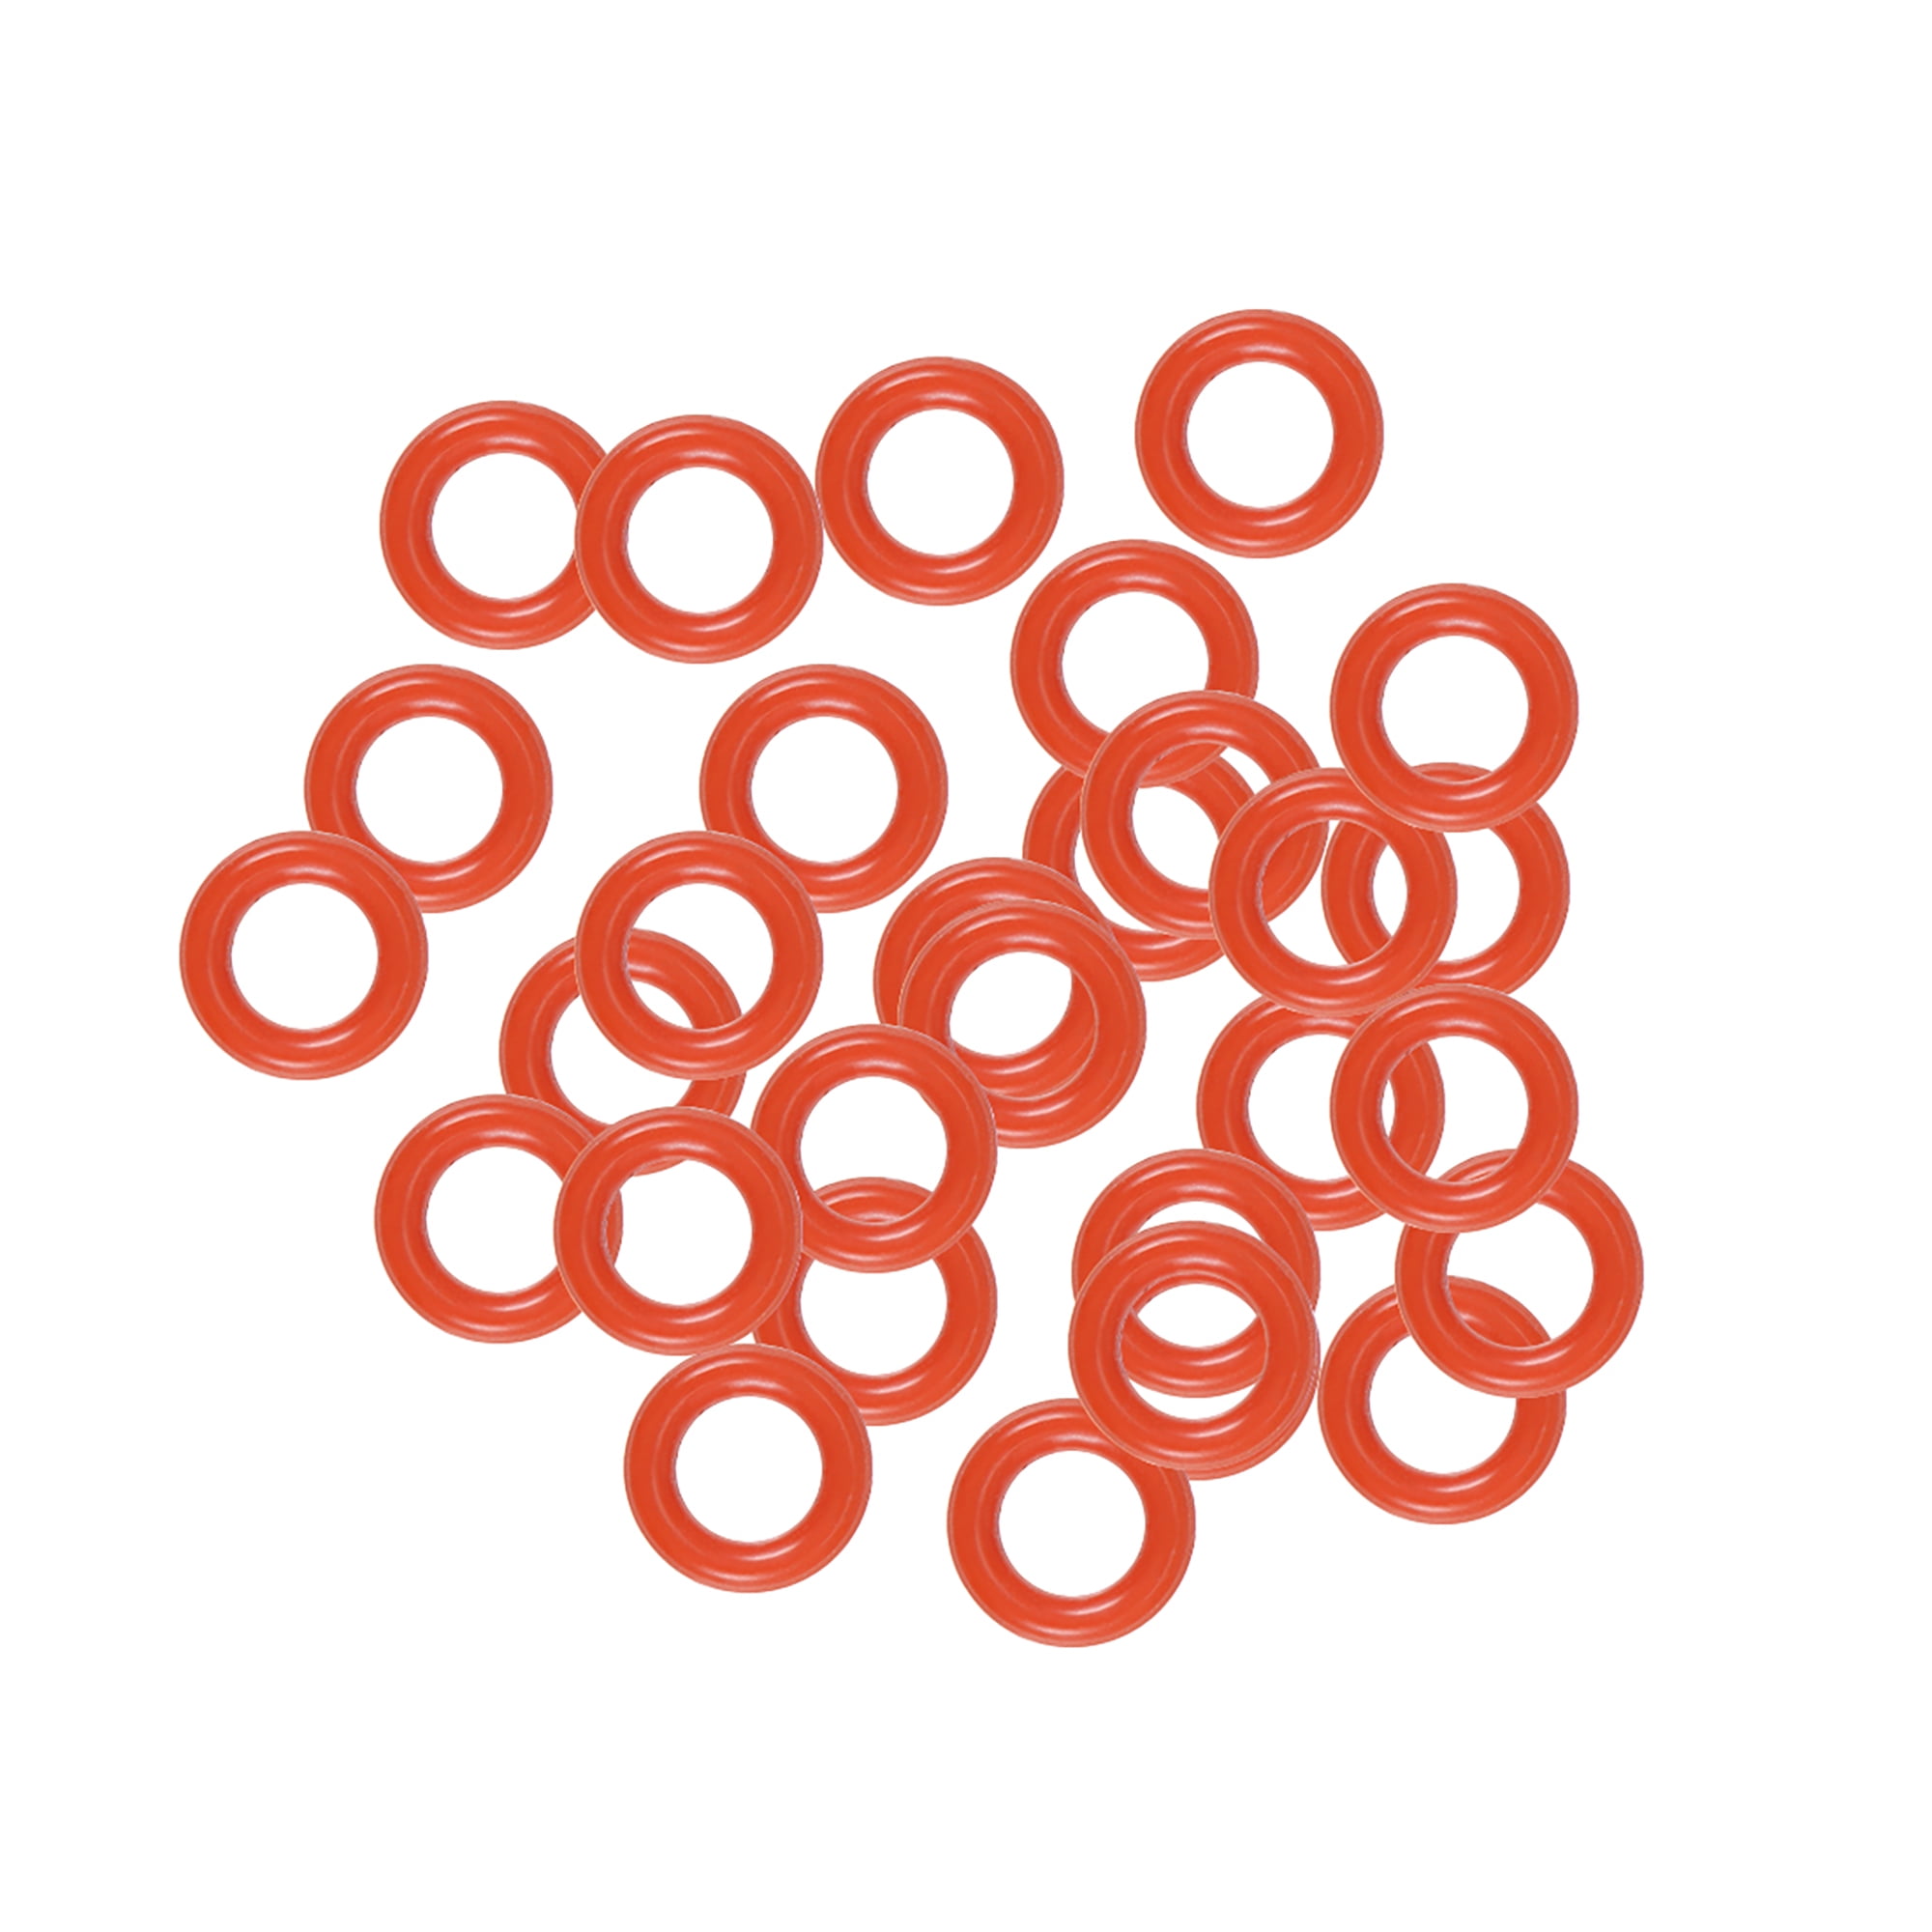 uxcell Silicone O-Ring VMQ Seal Rings Gasket Pack of 10 Red 3mm Width 16mm OD 10mm ID 